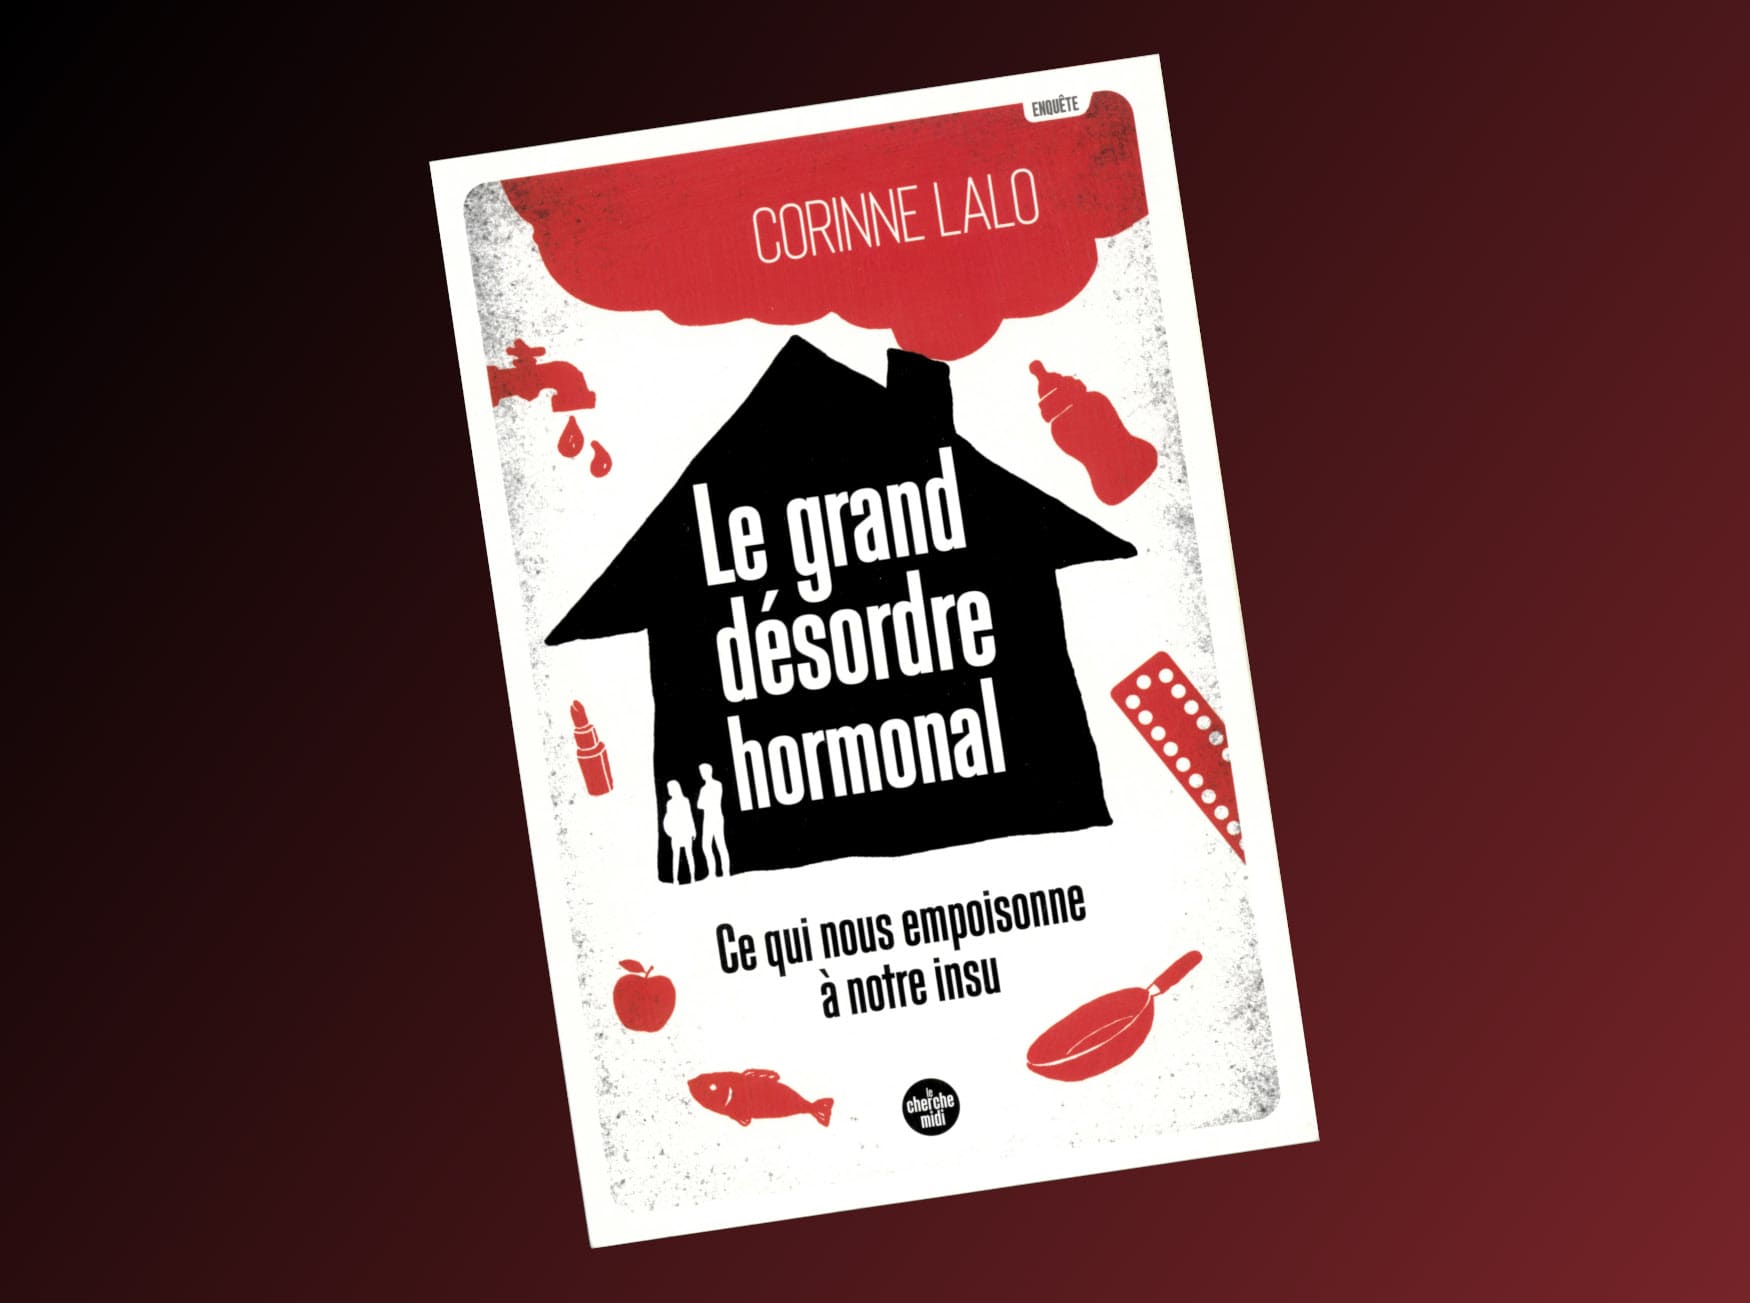 Le grand désordre hormonal, written by Corinne Lalo and published by Le Cherche Midi Editor